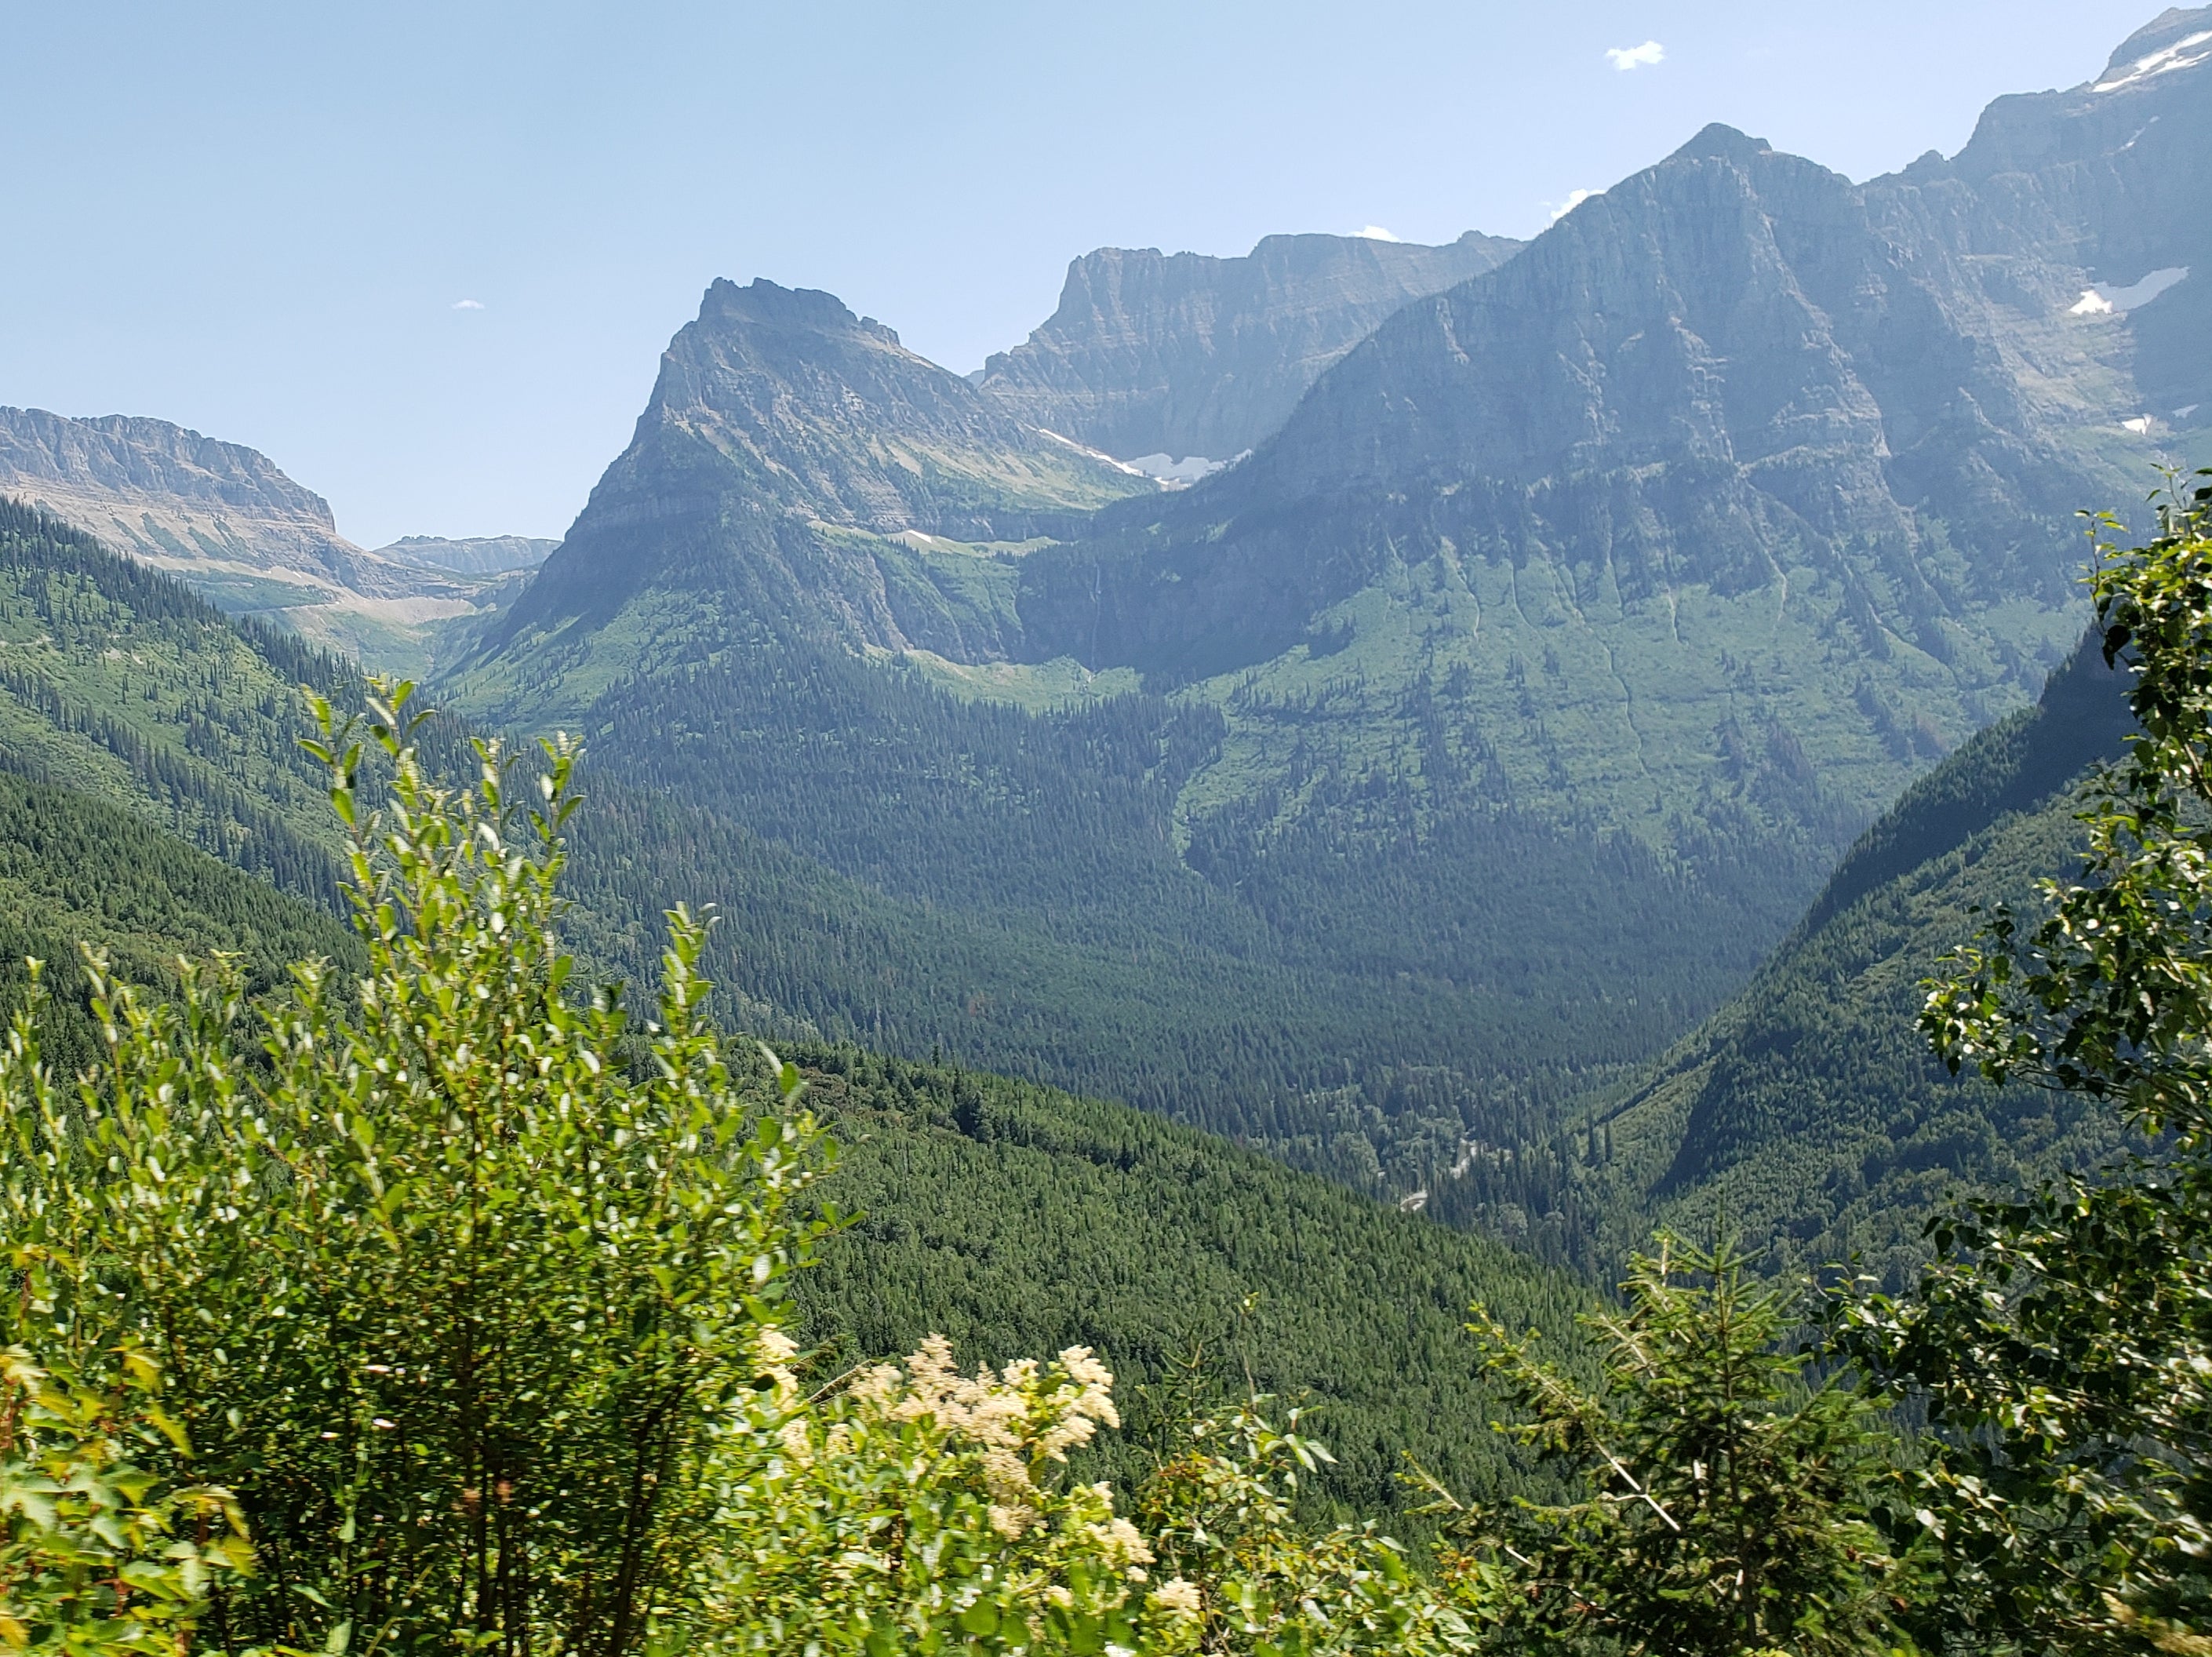 The heart of Glacier National Park